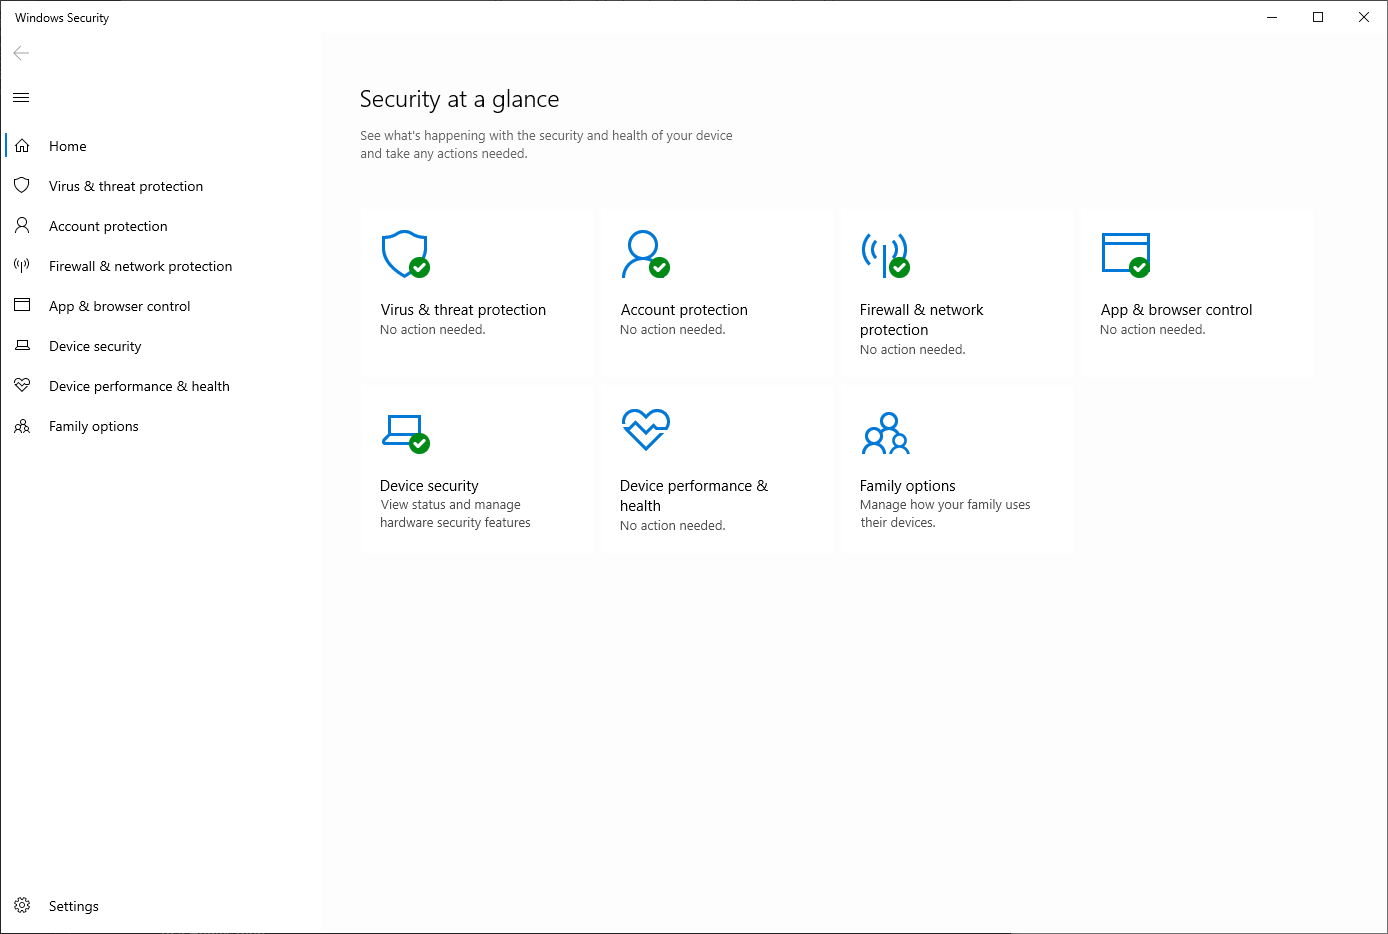 Screenshot of the Windows Defender Security Center, Security at a glance screen.